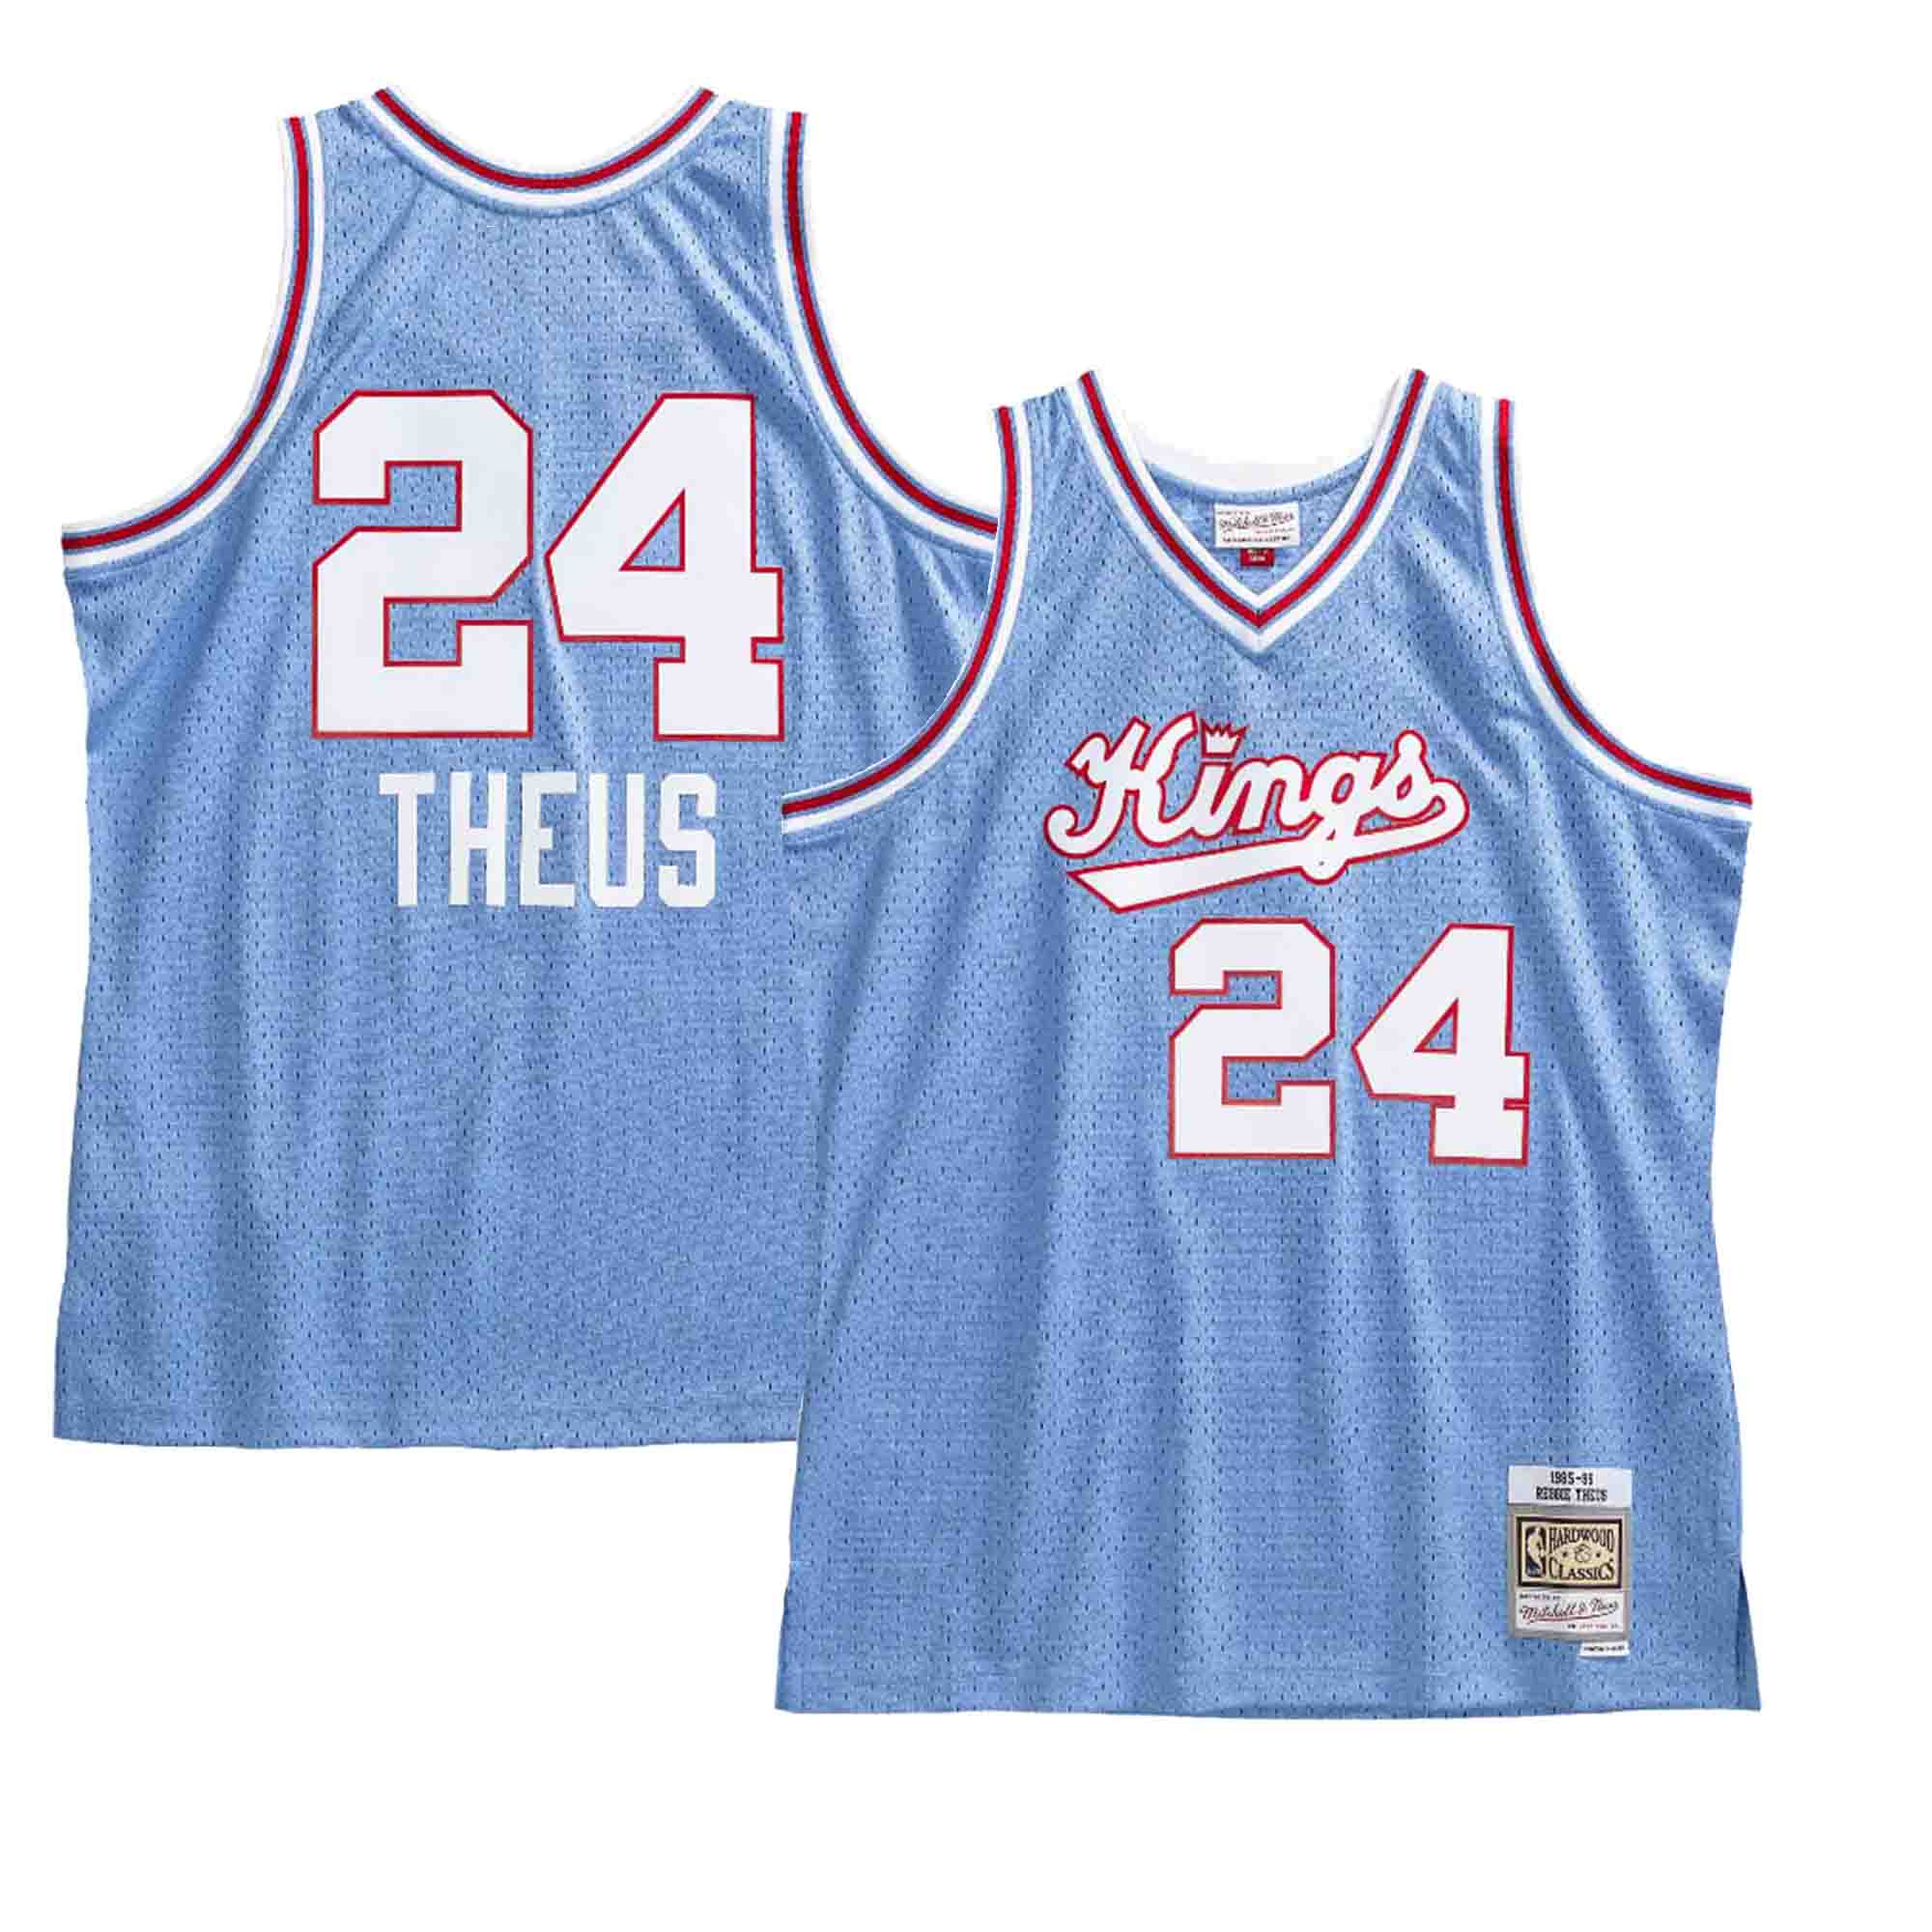 Best 3xl Authentic Reggie Theus Jersey.sf/pf Home for sale in Levittown,  Pennsylvania for 2023